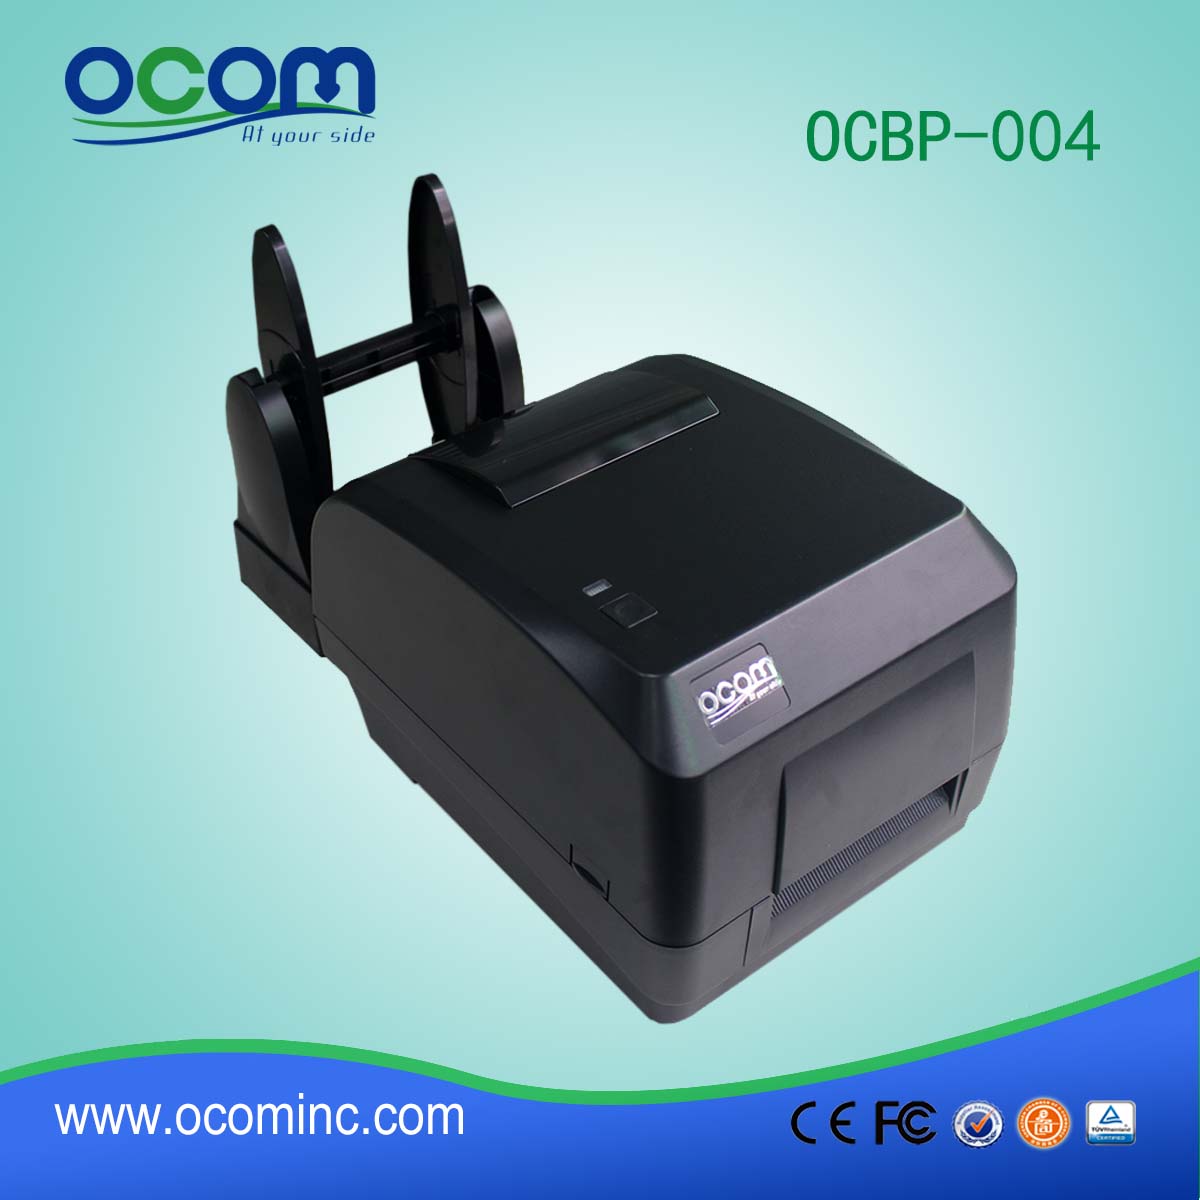 4 Inch Thermal Transfer and Direct Thermal Label Printer